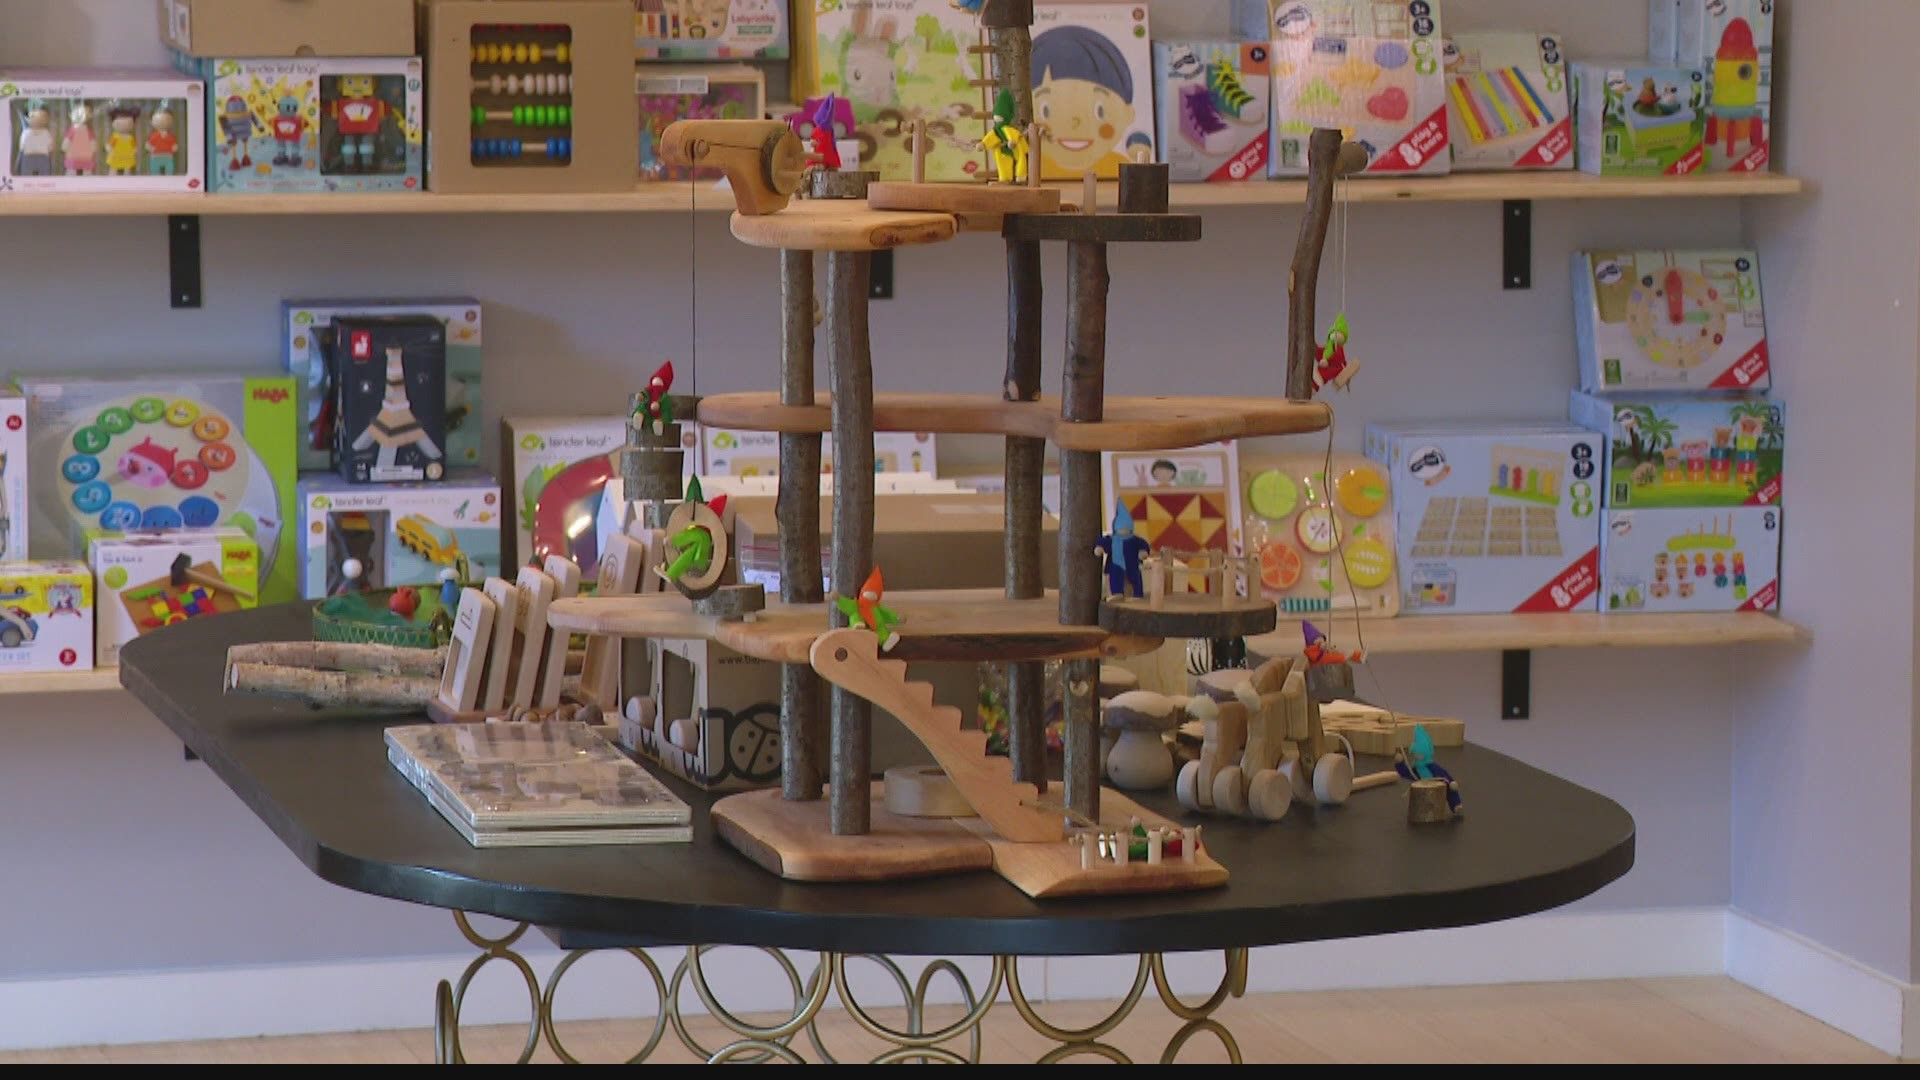 The boutique-style toy shop sells mostly handmade products that aren't made of plastic.